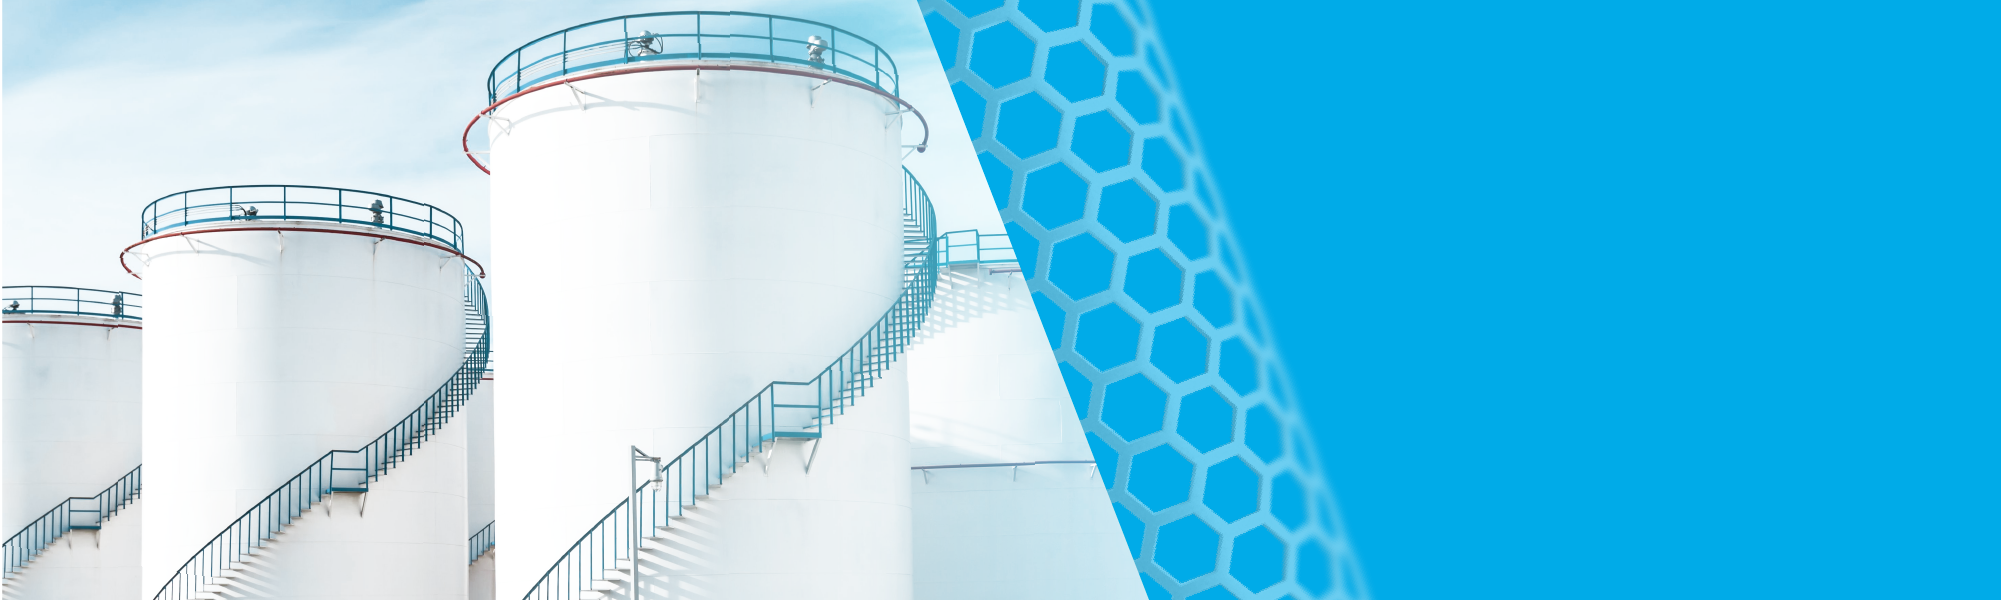 Webinar: Conductive, durable, light-colored tank and pipe linings with graphene nanotubes